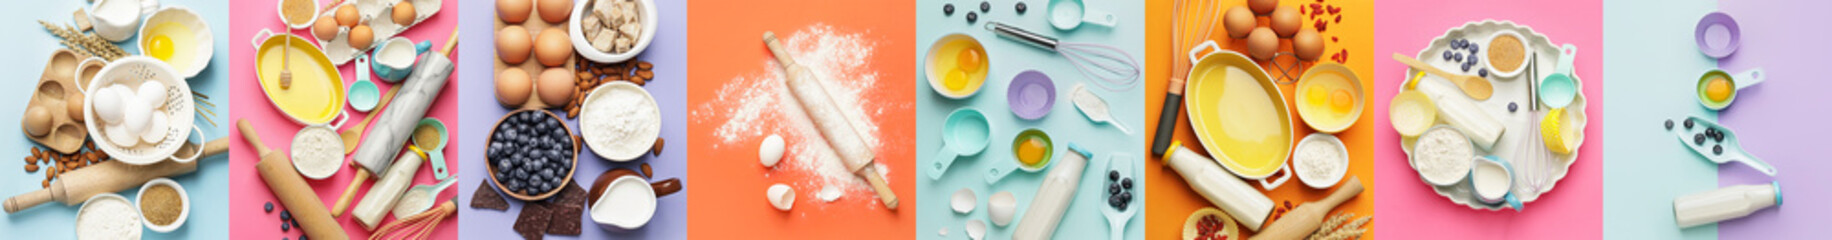 Collage of kitchen utensils and ingredients for preparing pastry on color background, top view